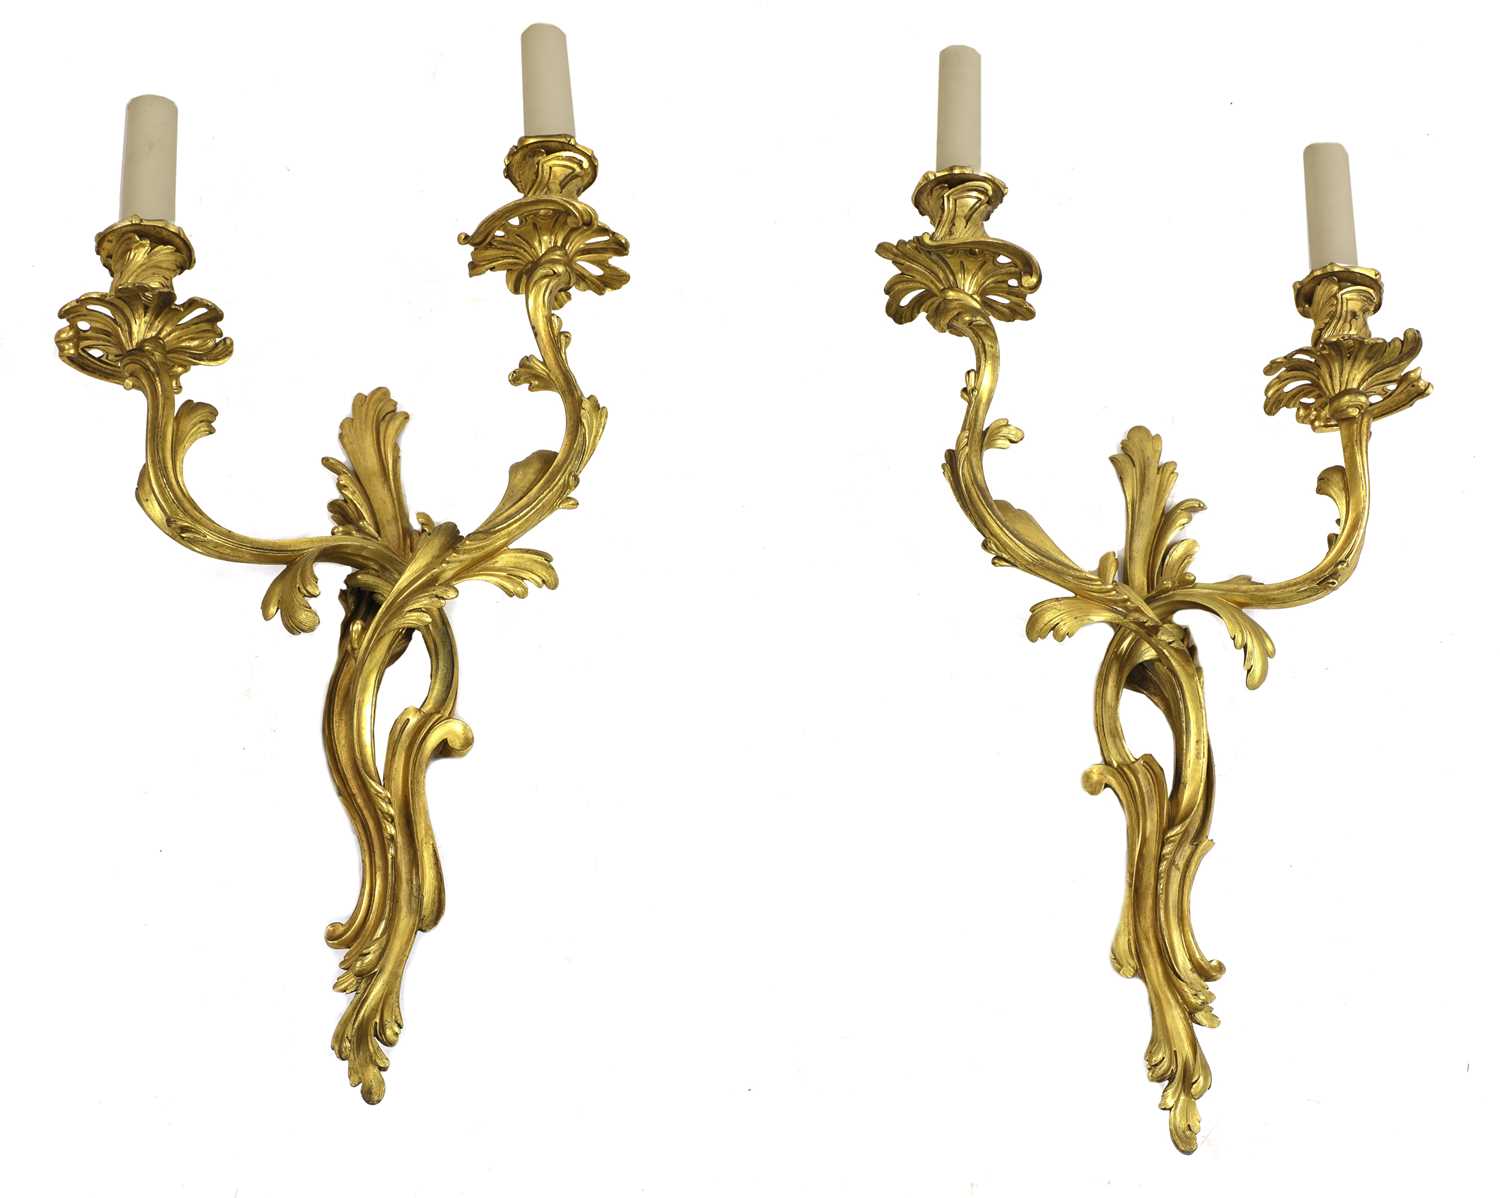 Lot 31 - A pair of French rococo-style gilt-bronze wall lights